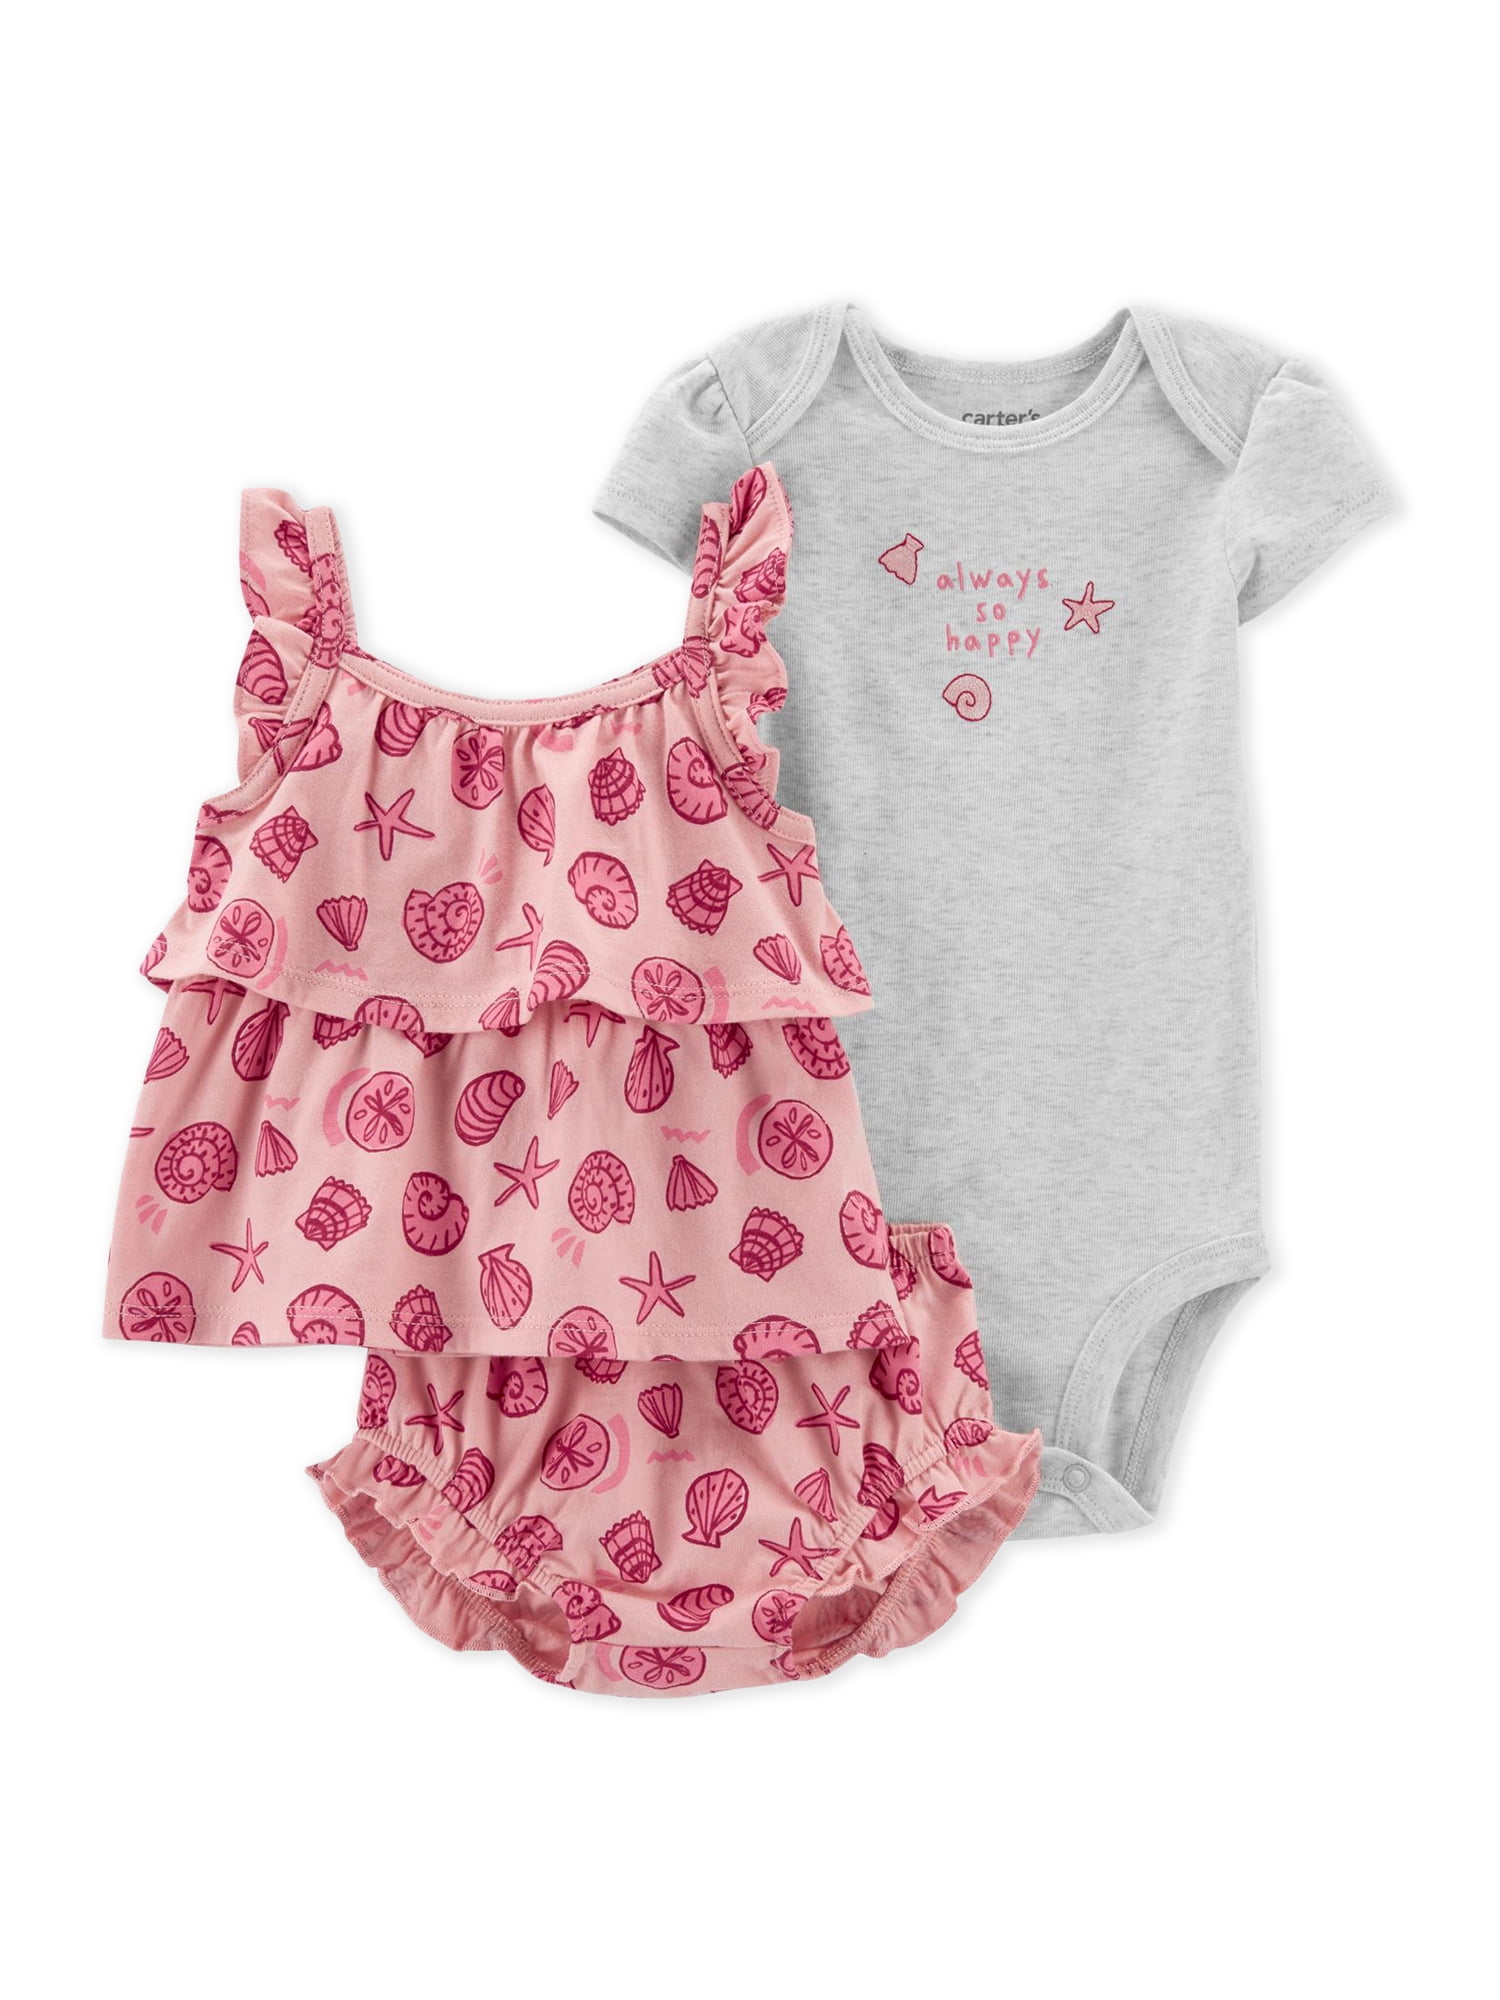 Carter's Child of Mine Baby Girl Shorts Outfit Set, Sizes 0-24M